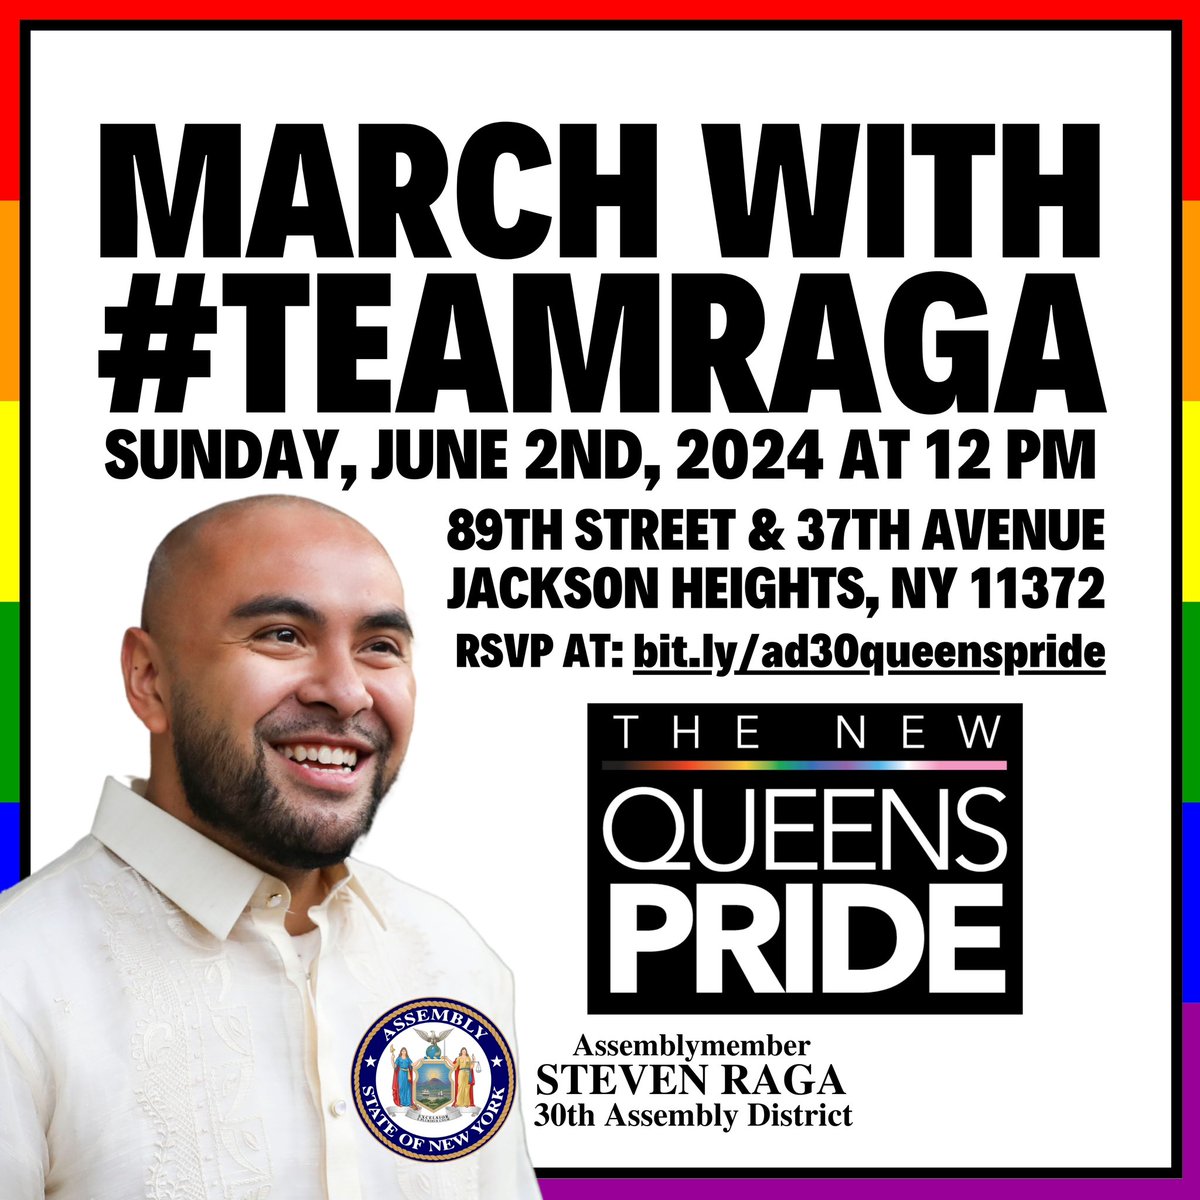 March with #TeamRaga and #AD30 at the New Queens Pride Parade! 🏳️‍🌈 🏳️‍⚧️ Join us on Sunday, June 2nd, starting at 12 PM at 89th Street & 37th Avenue. RSVP at bit.ly/ad30queenspride